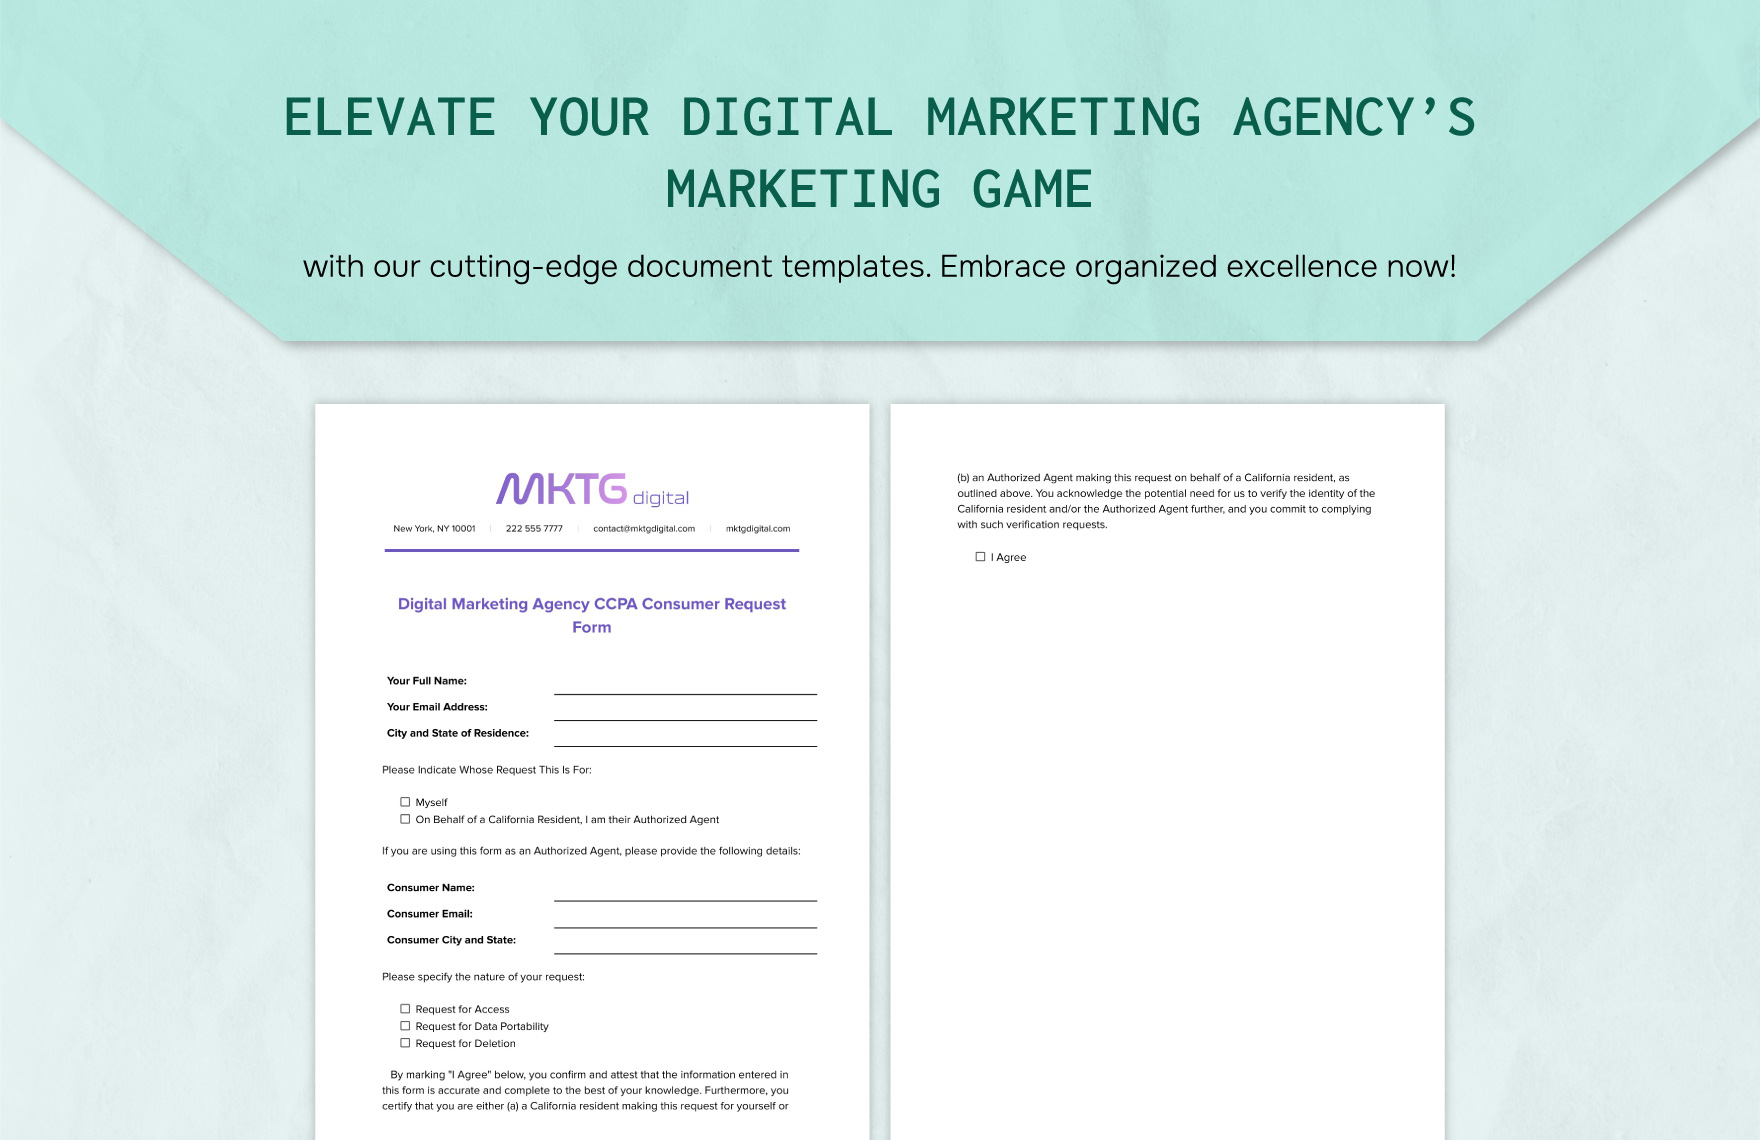 Digital Marketing Agency CCPA Consumer Request Form Template